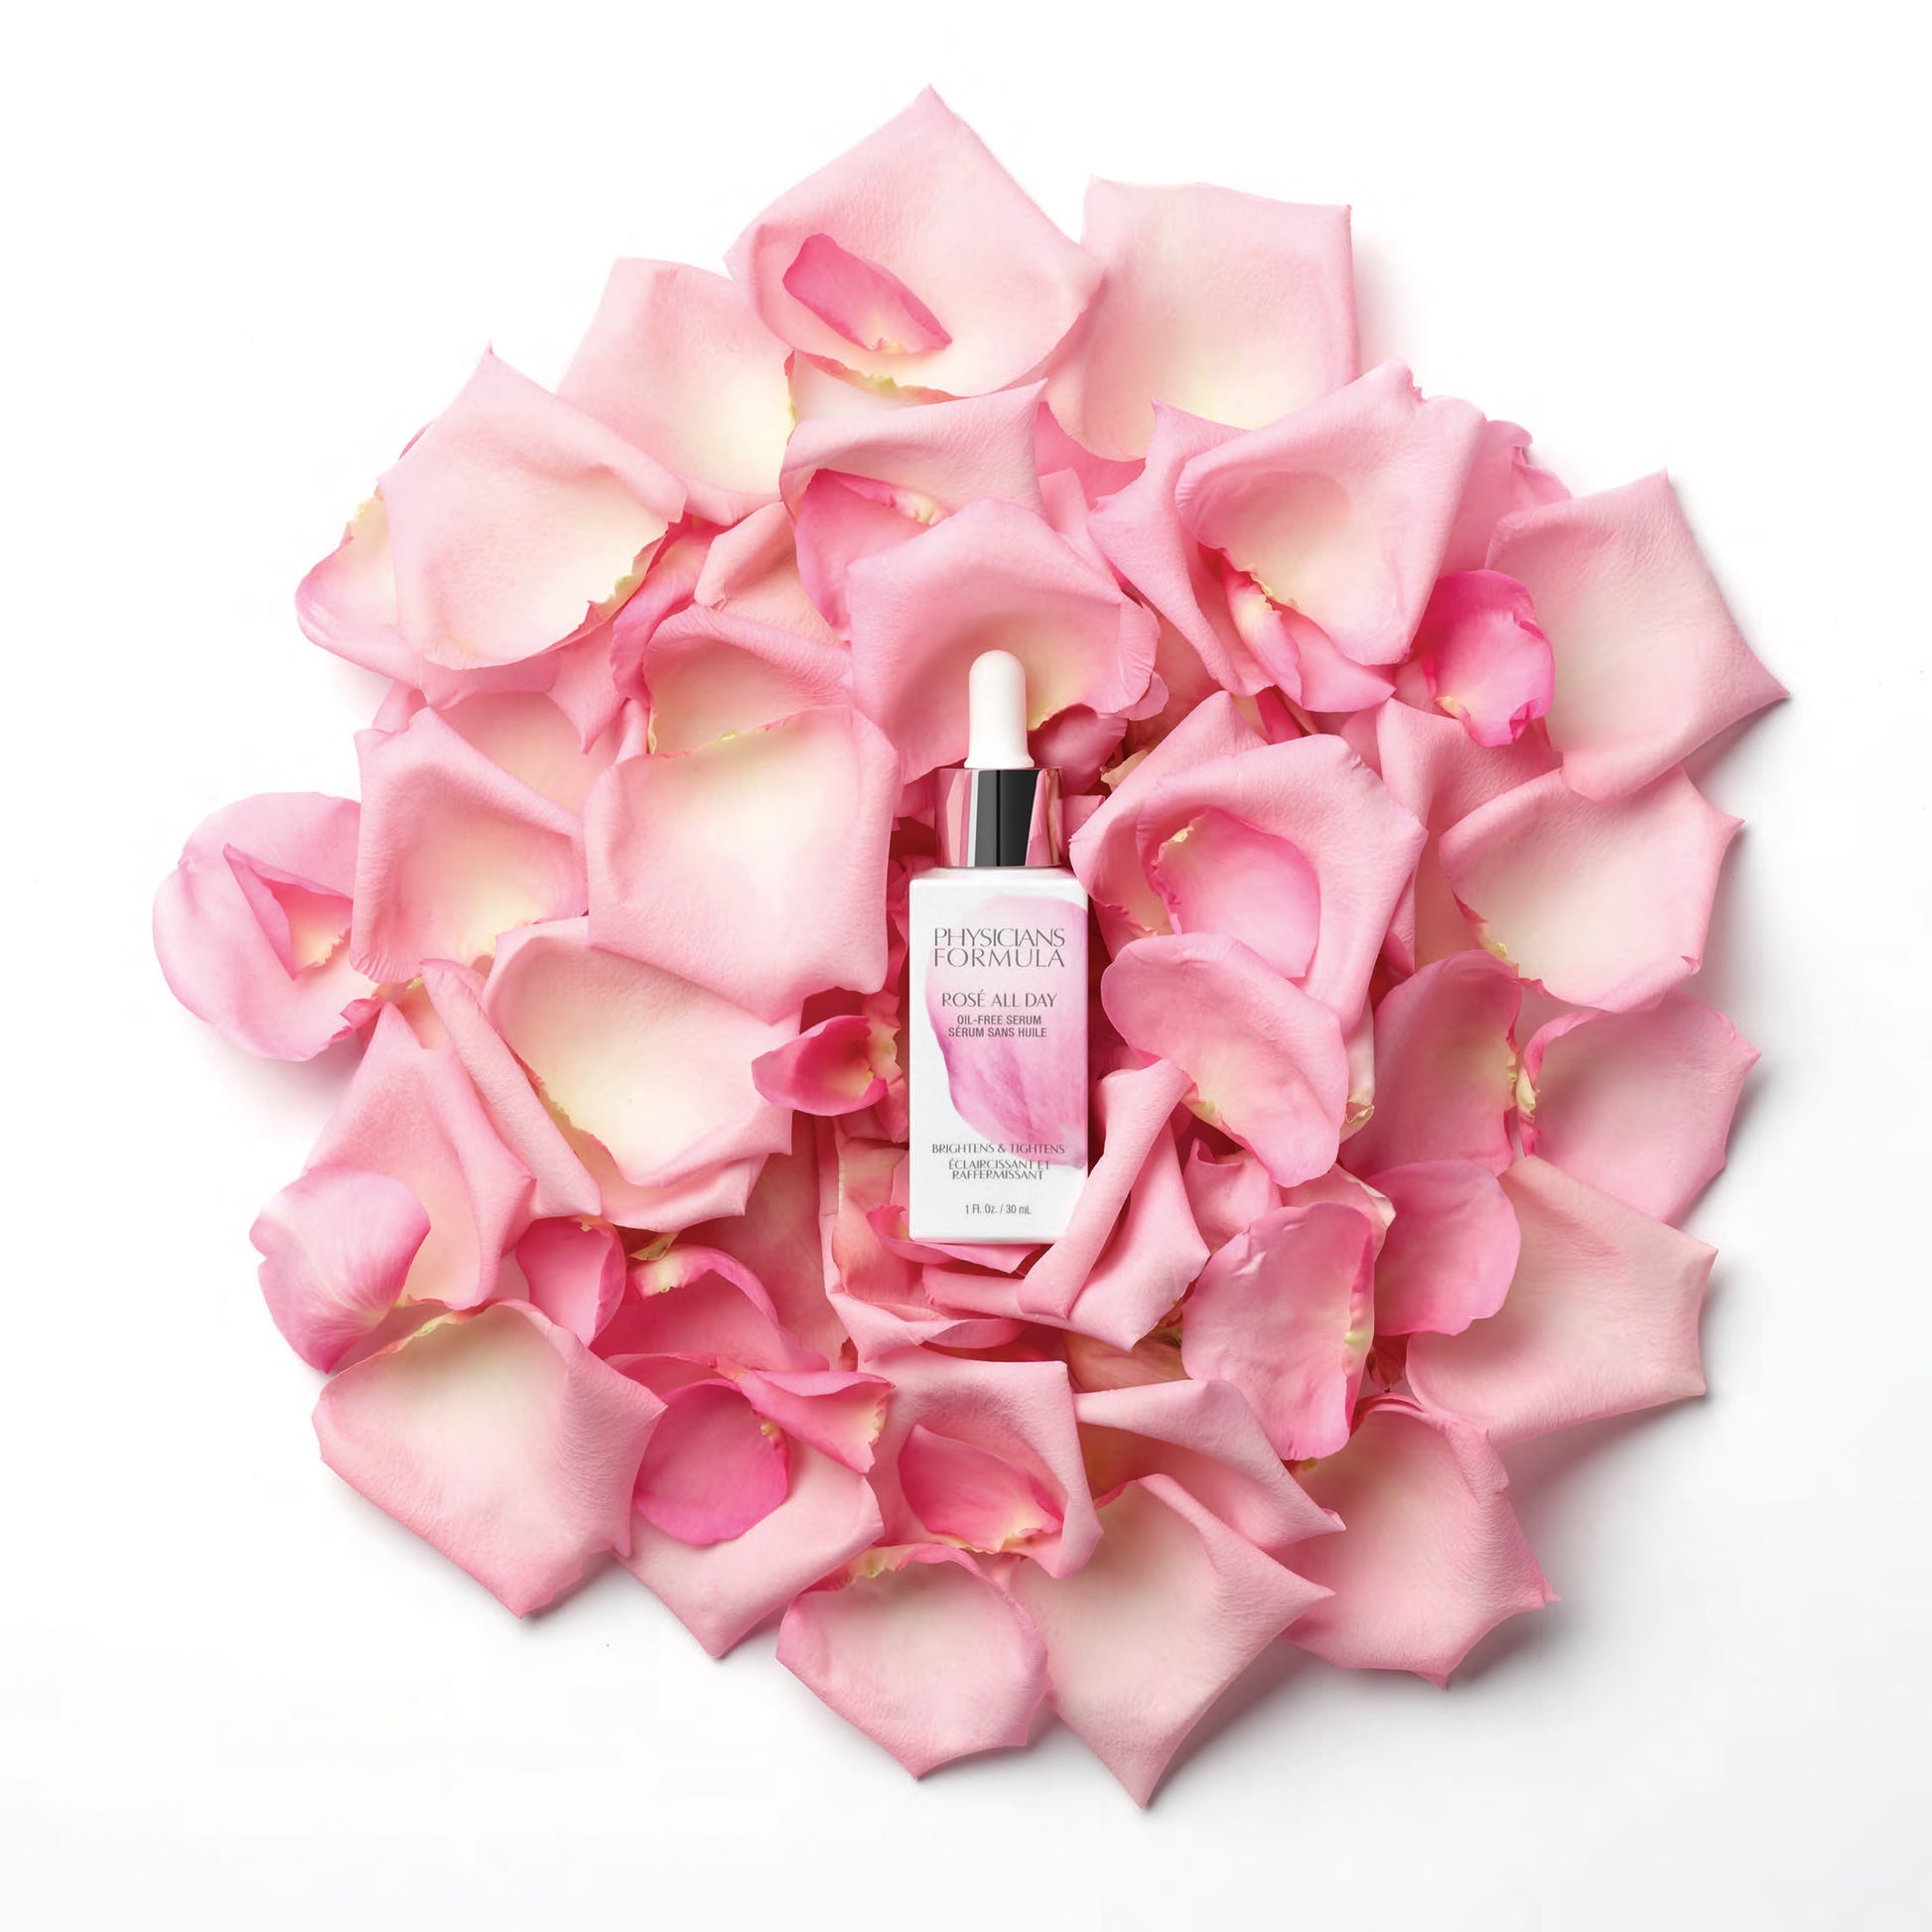 Physicians Formula Rose All Day Oil-Free Serum Hero